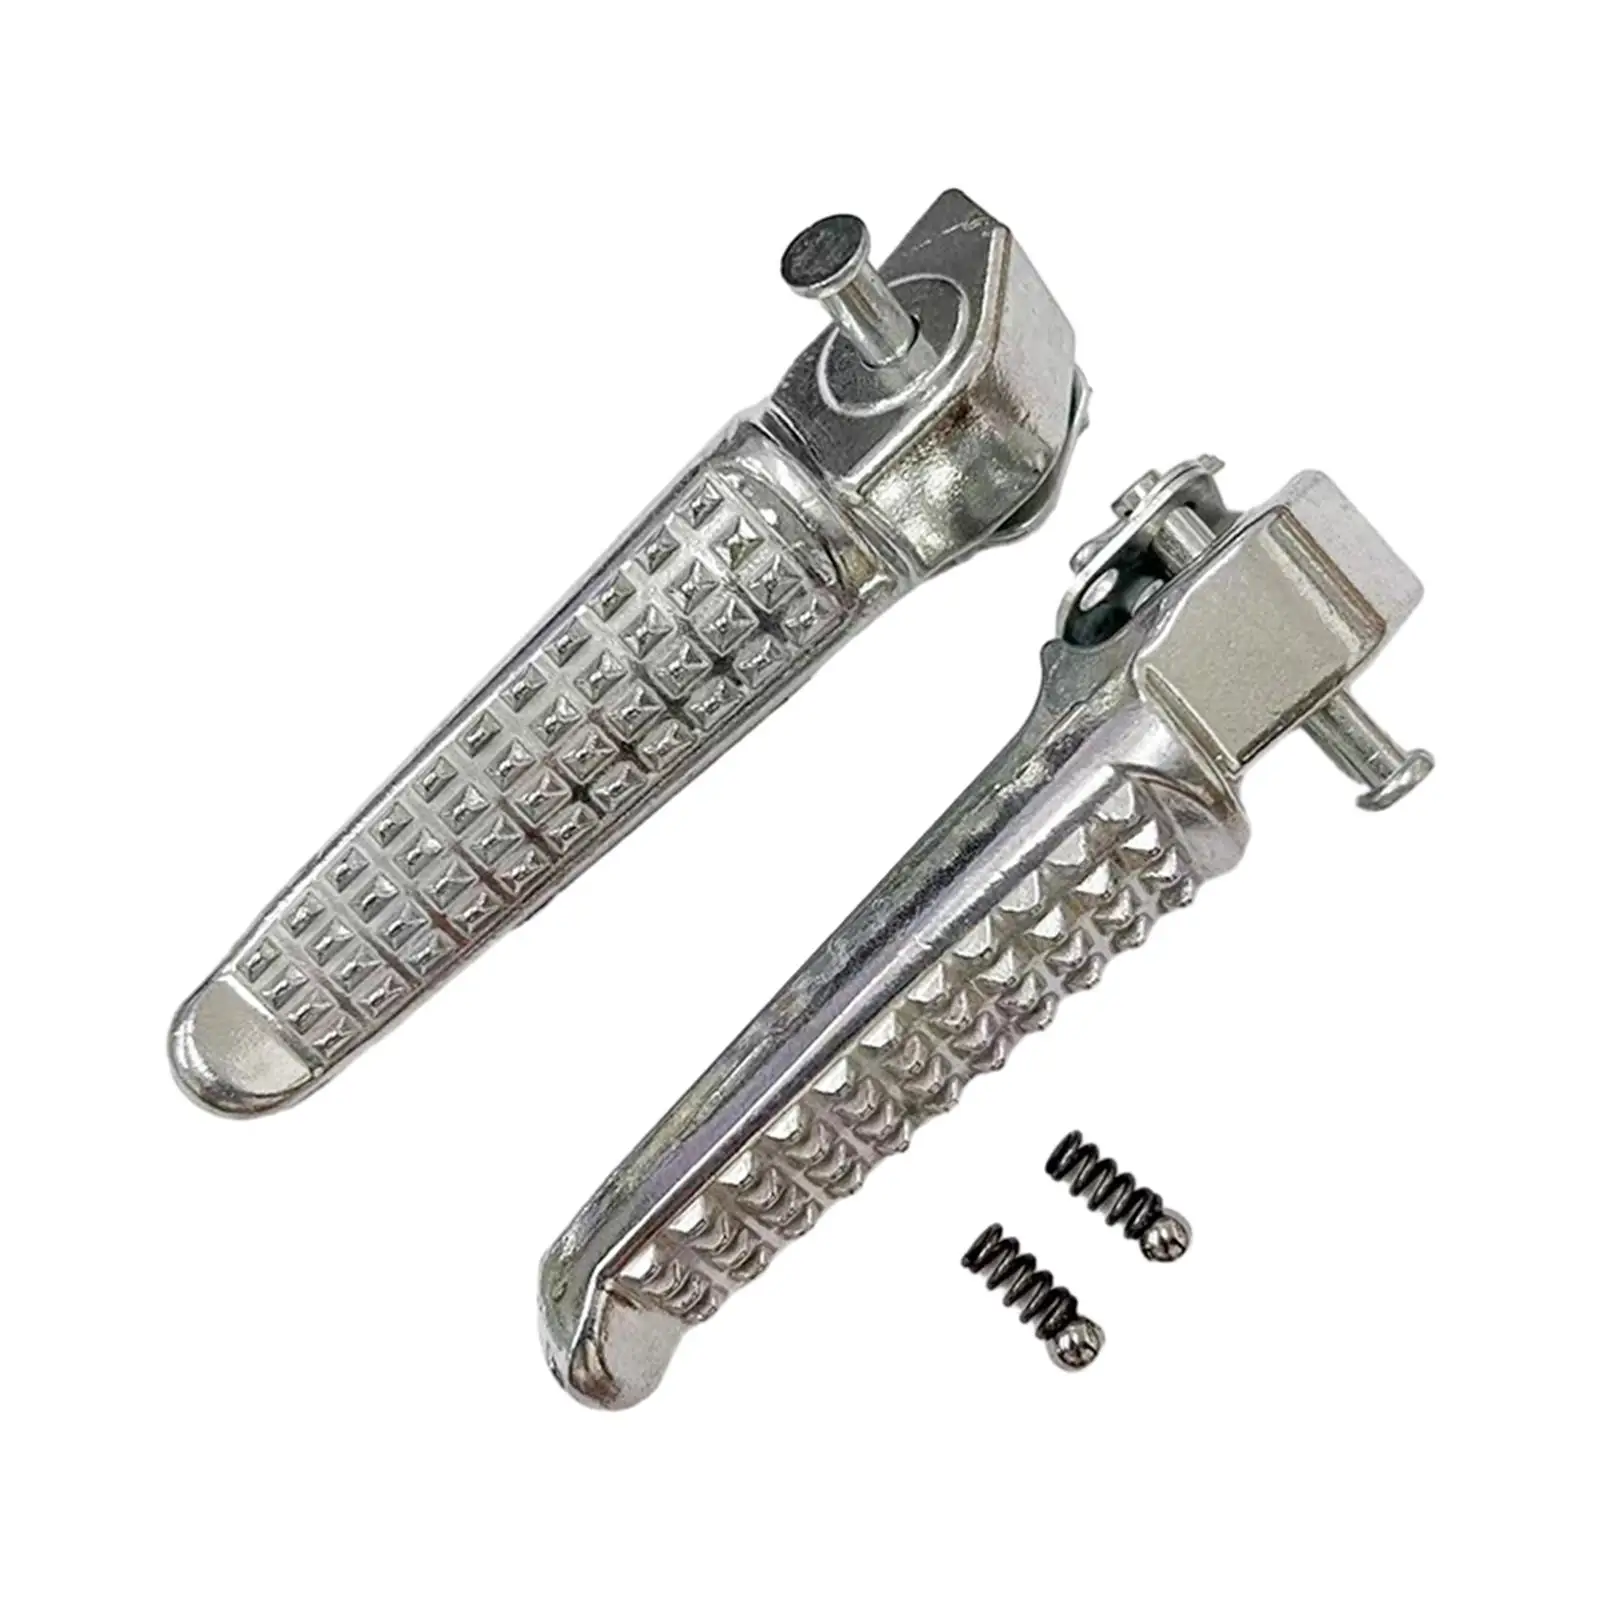 2Pcs Motorcycle Rear Passenger Foot Pegs Easy to Install Accessory Universal